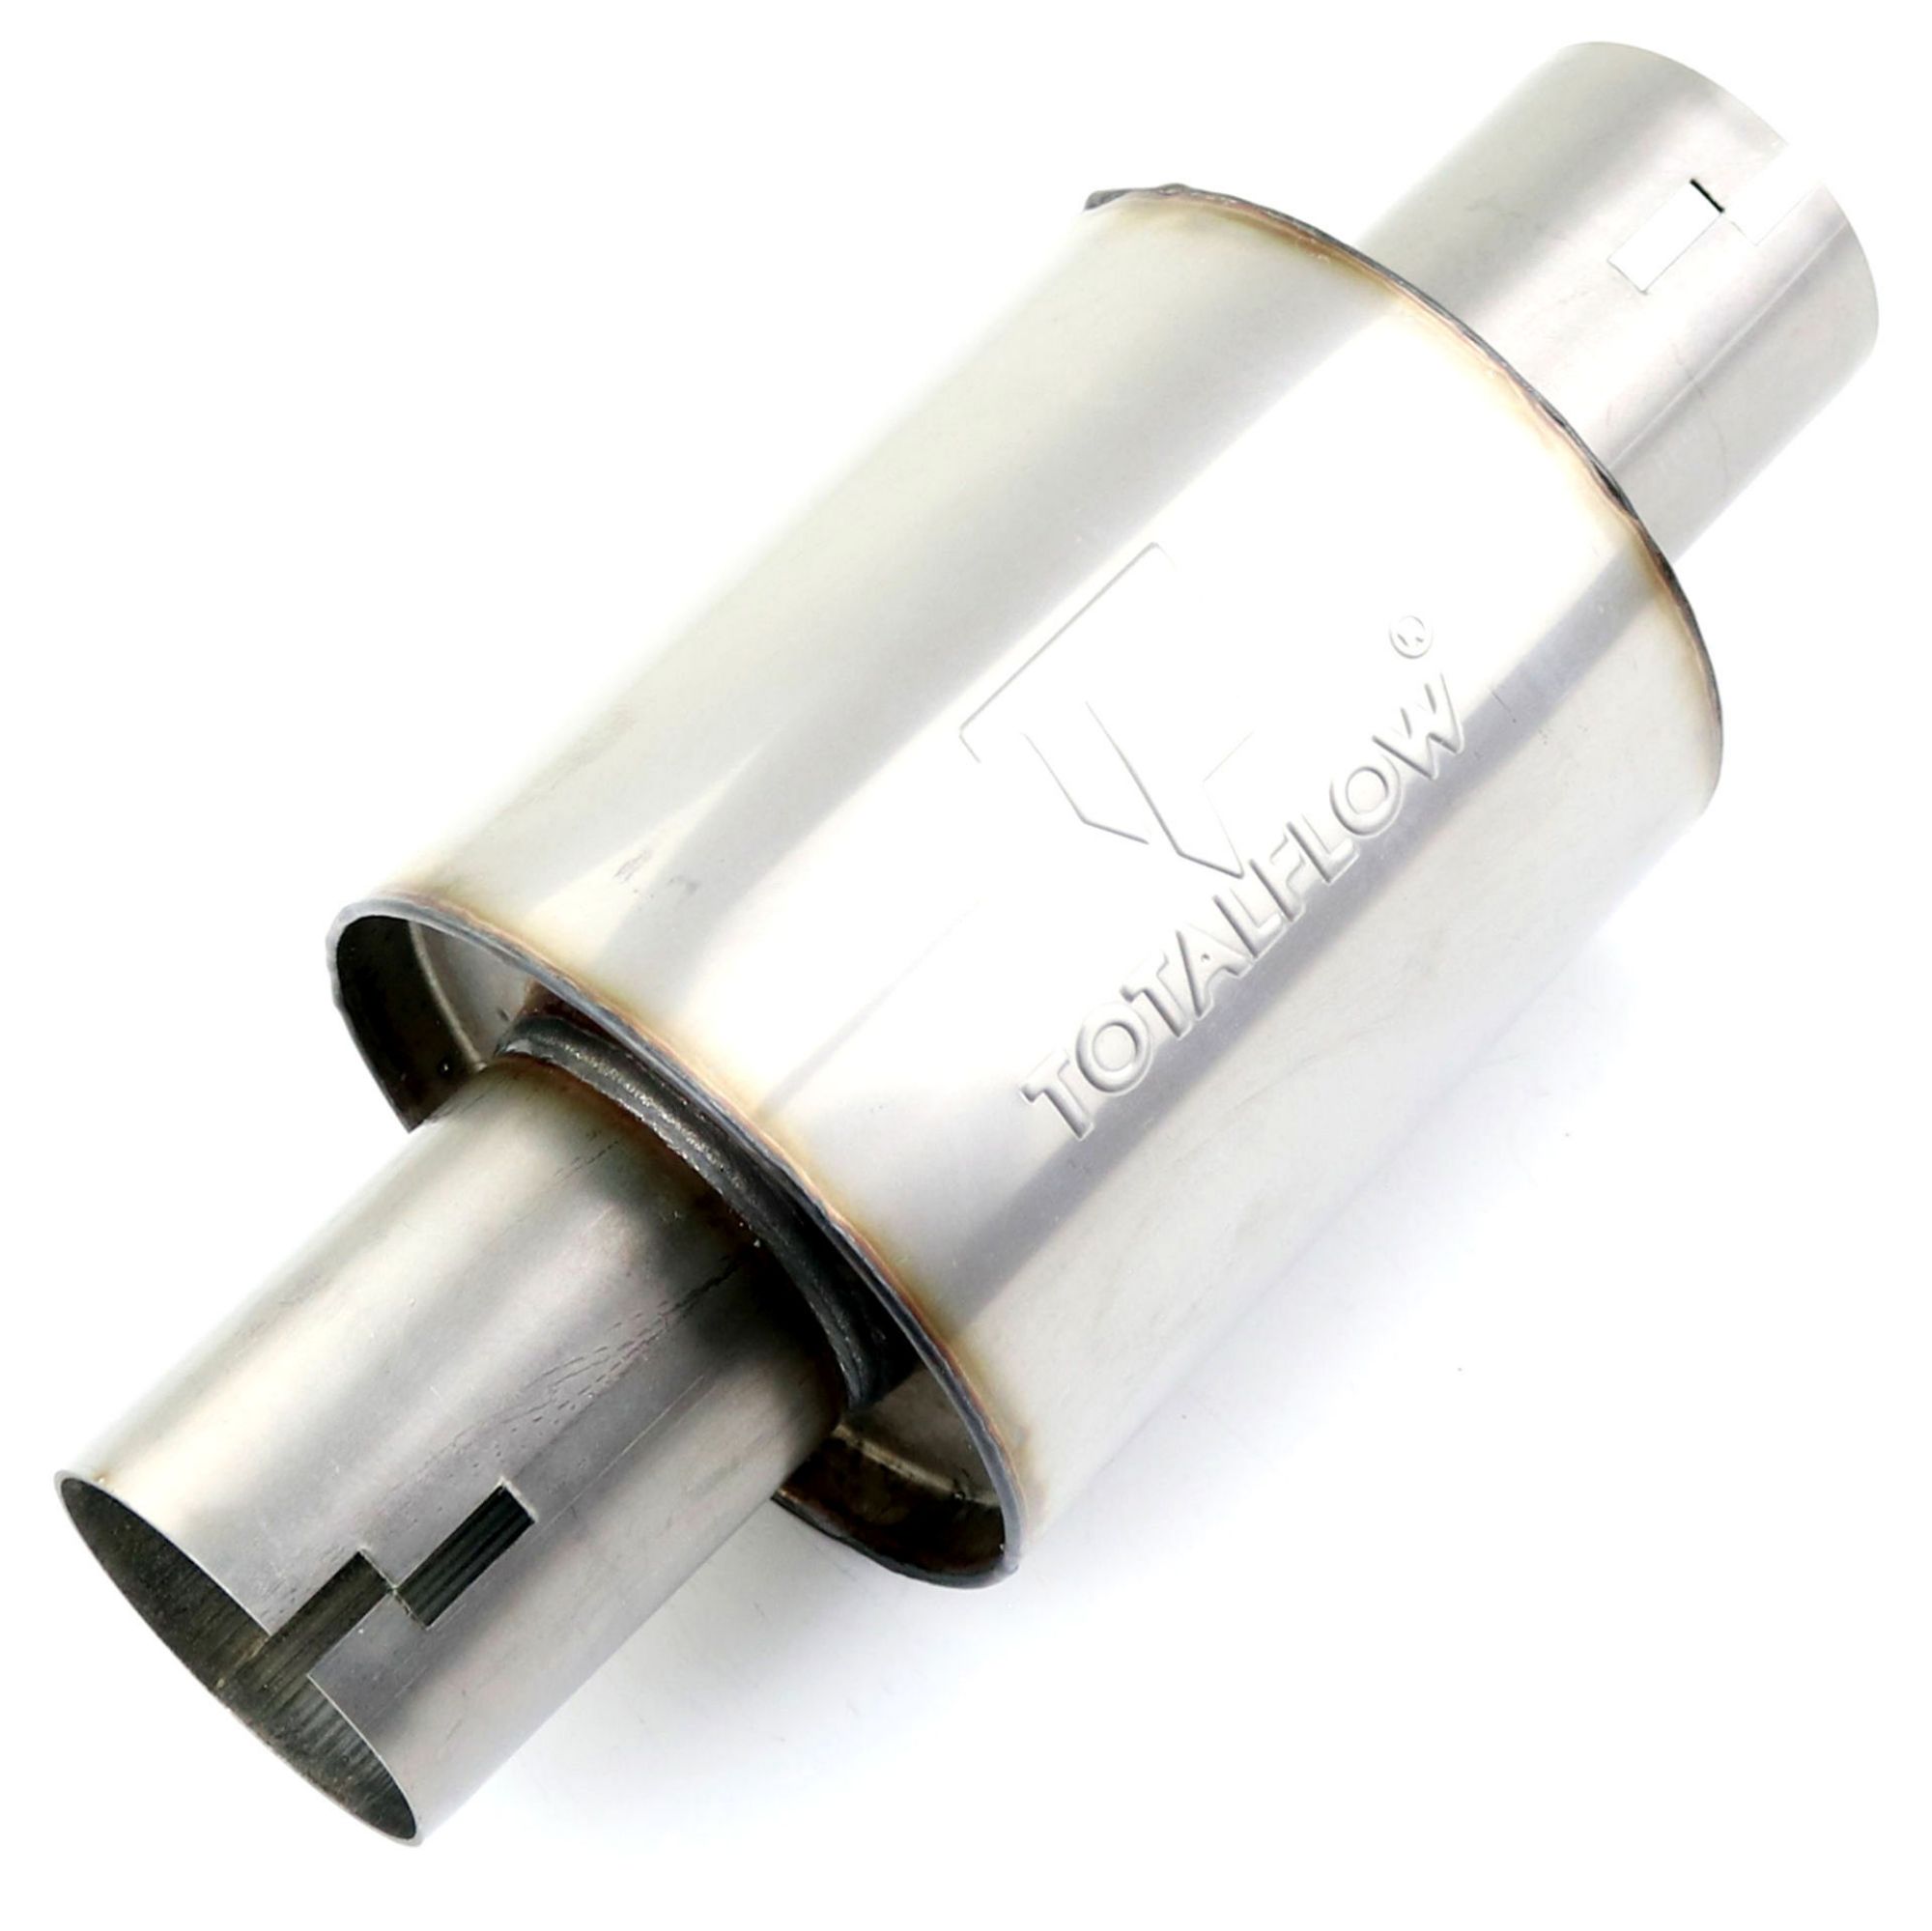 TOTALFLOW 22319N Straight Through Universal Notched Ends Exhaust Muffler - 3 Inch ID